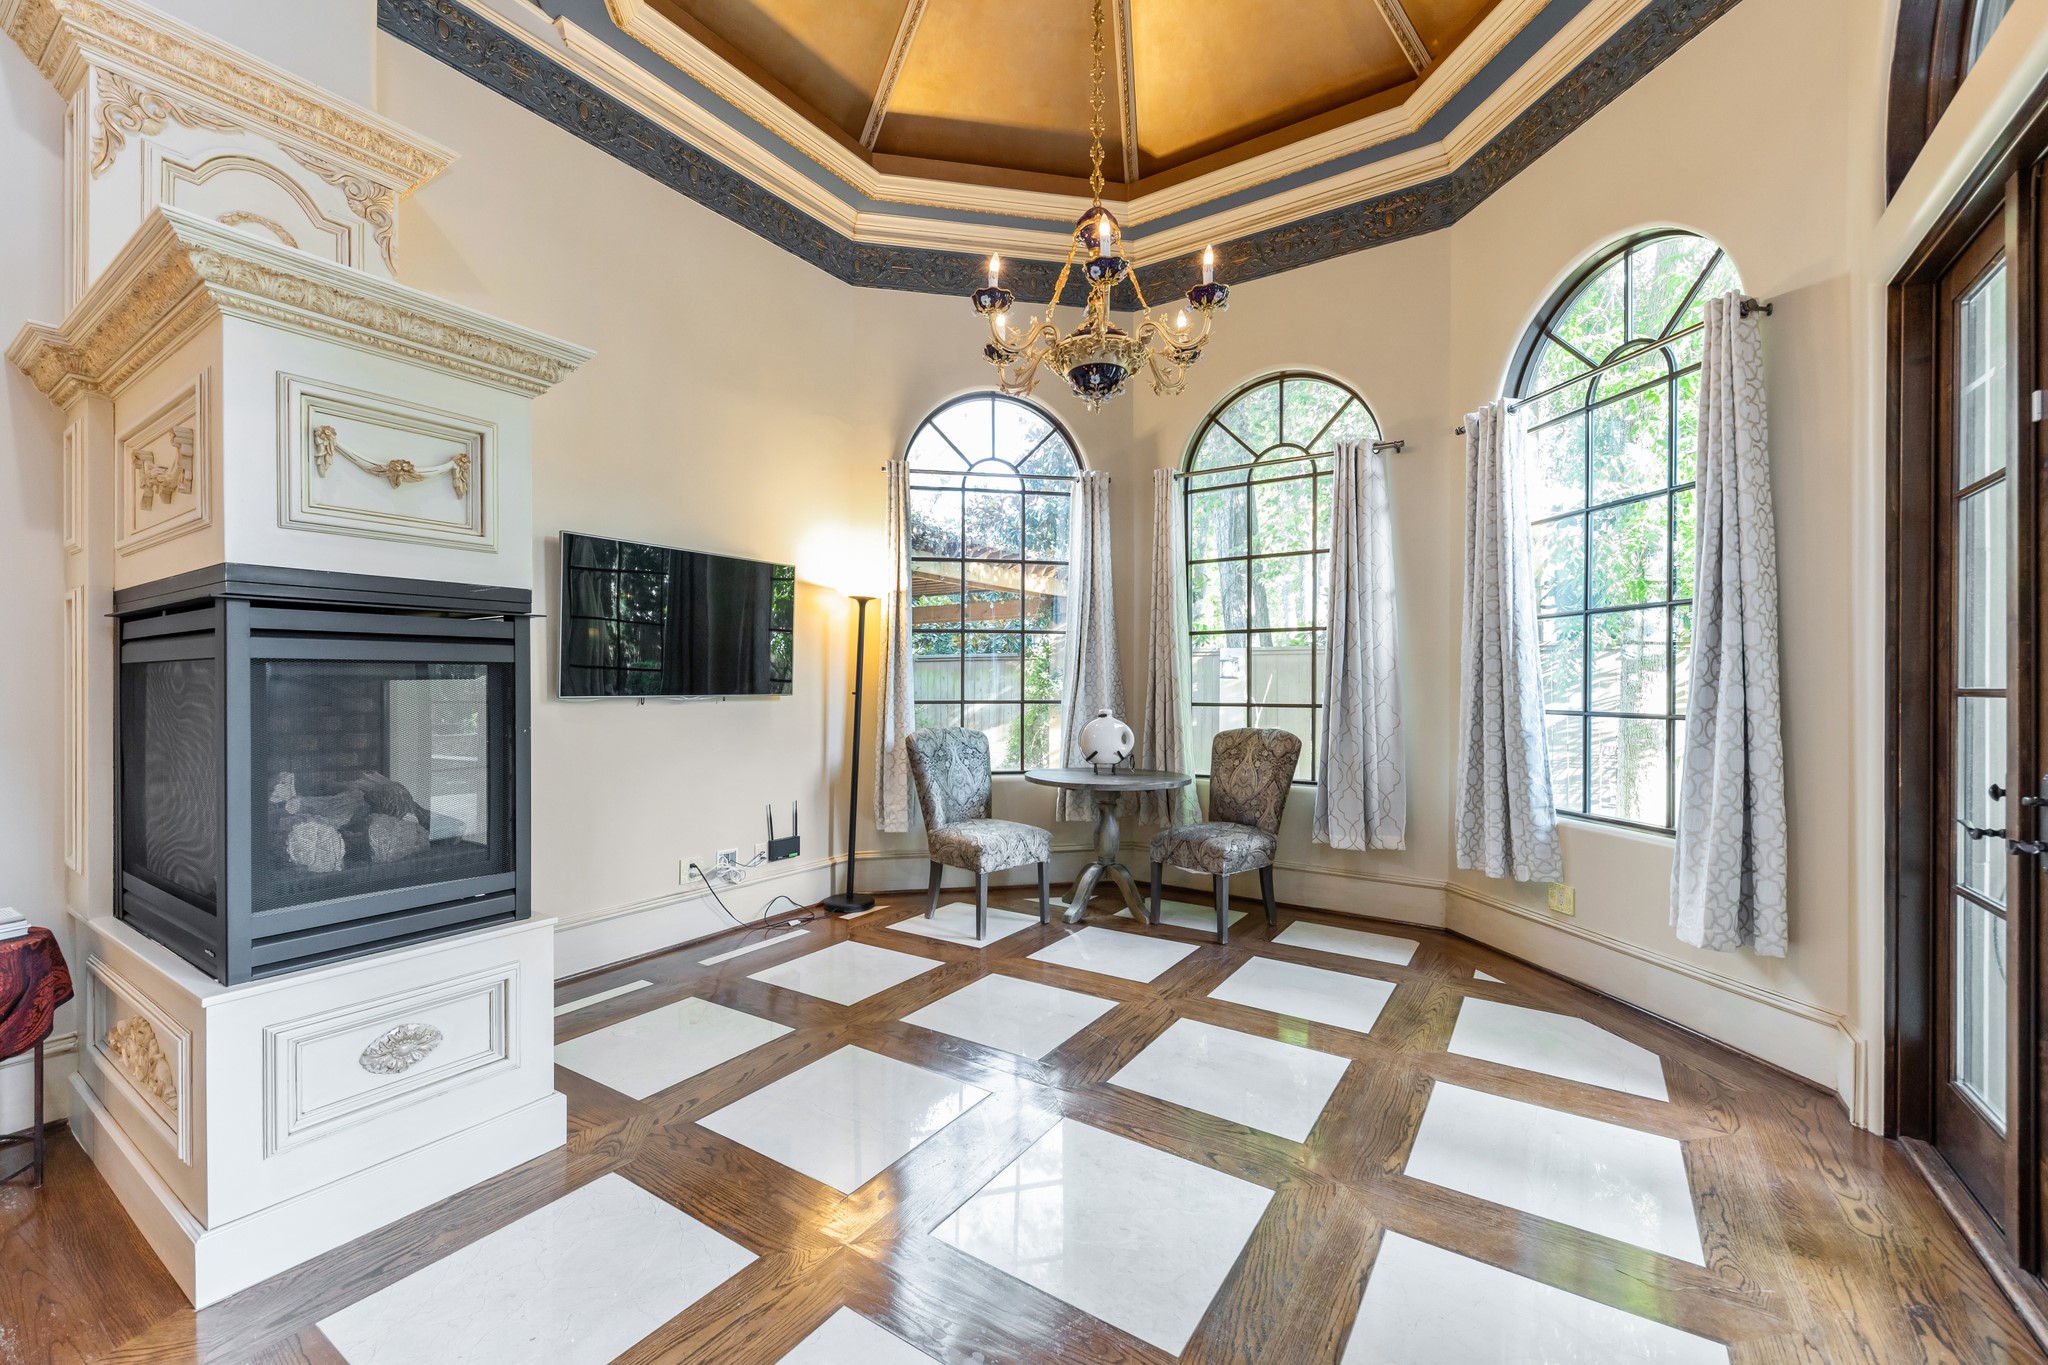 A luxurious sitting area with a custom designed domed ceiling, bay of large picture windows with picturesque views, 3-sided gas log fireplace, double doors lead to a relaxing primary private porch.